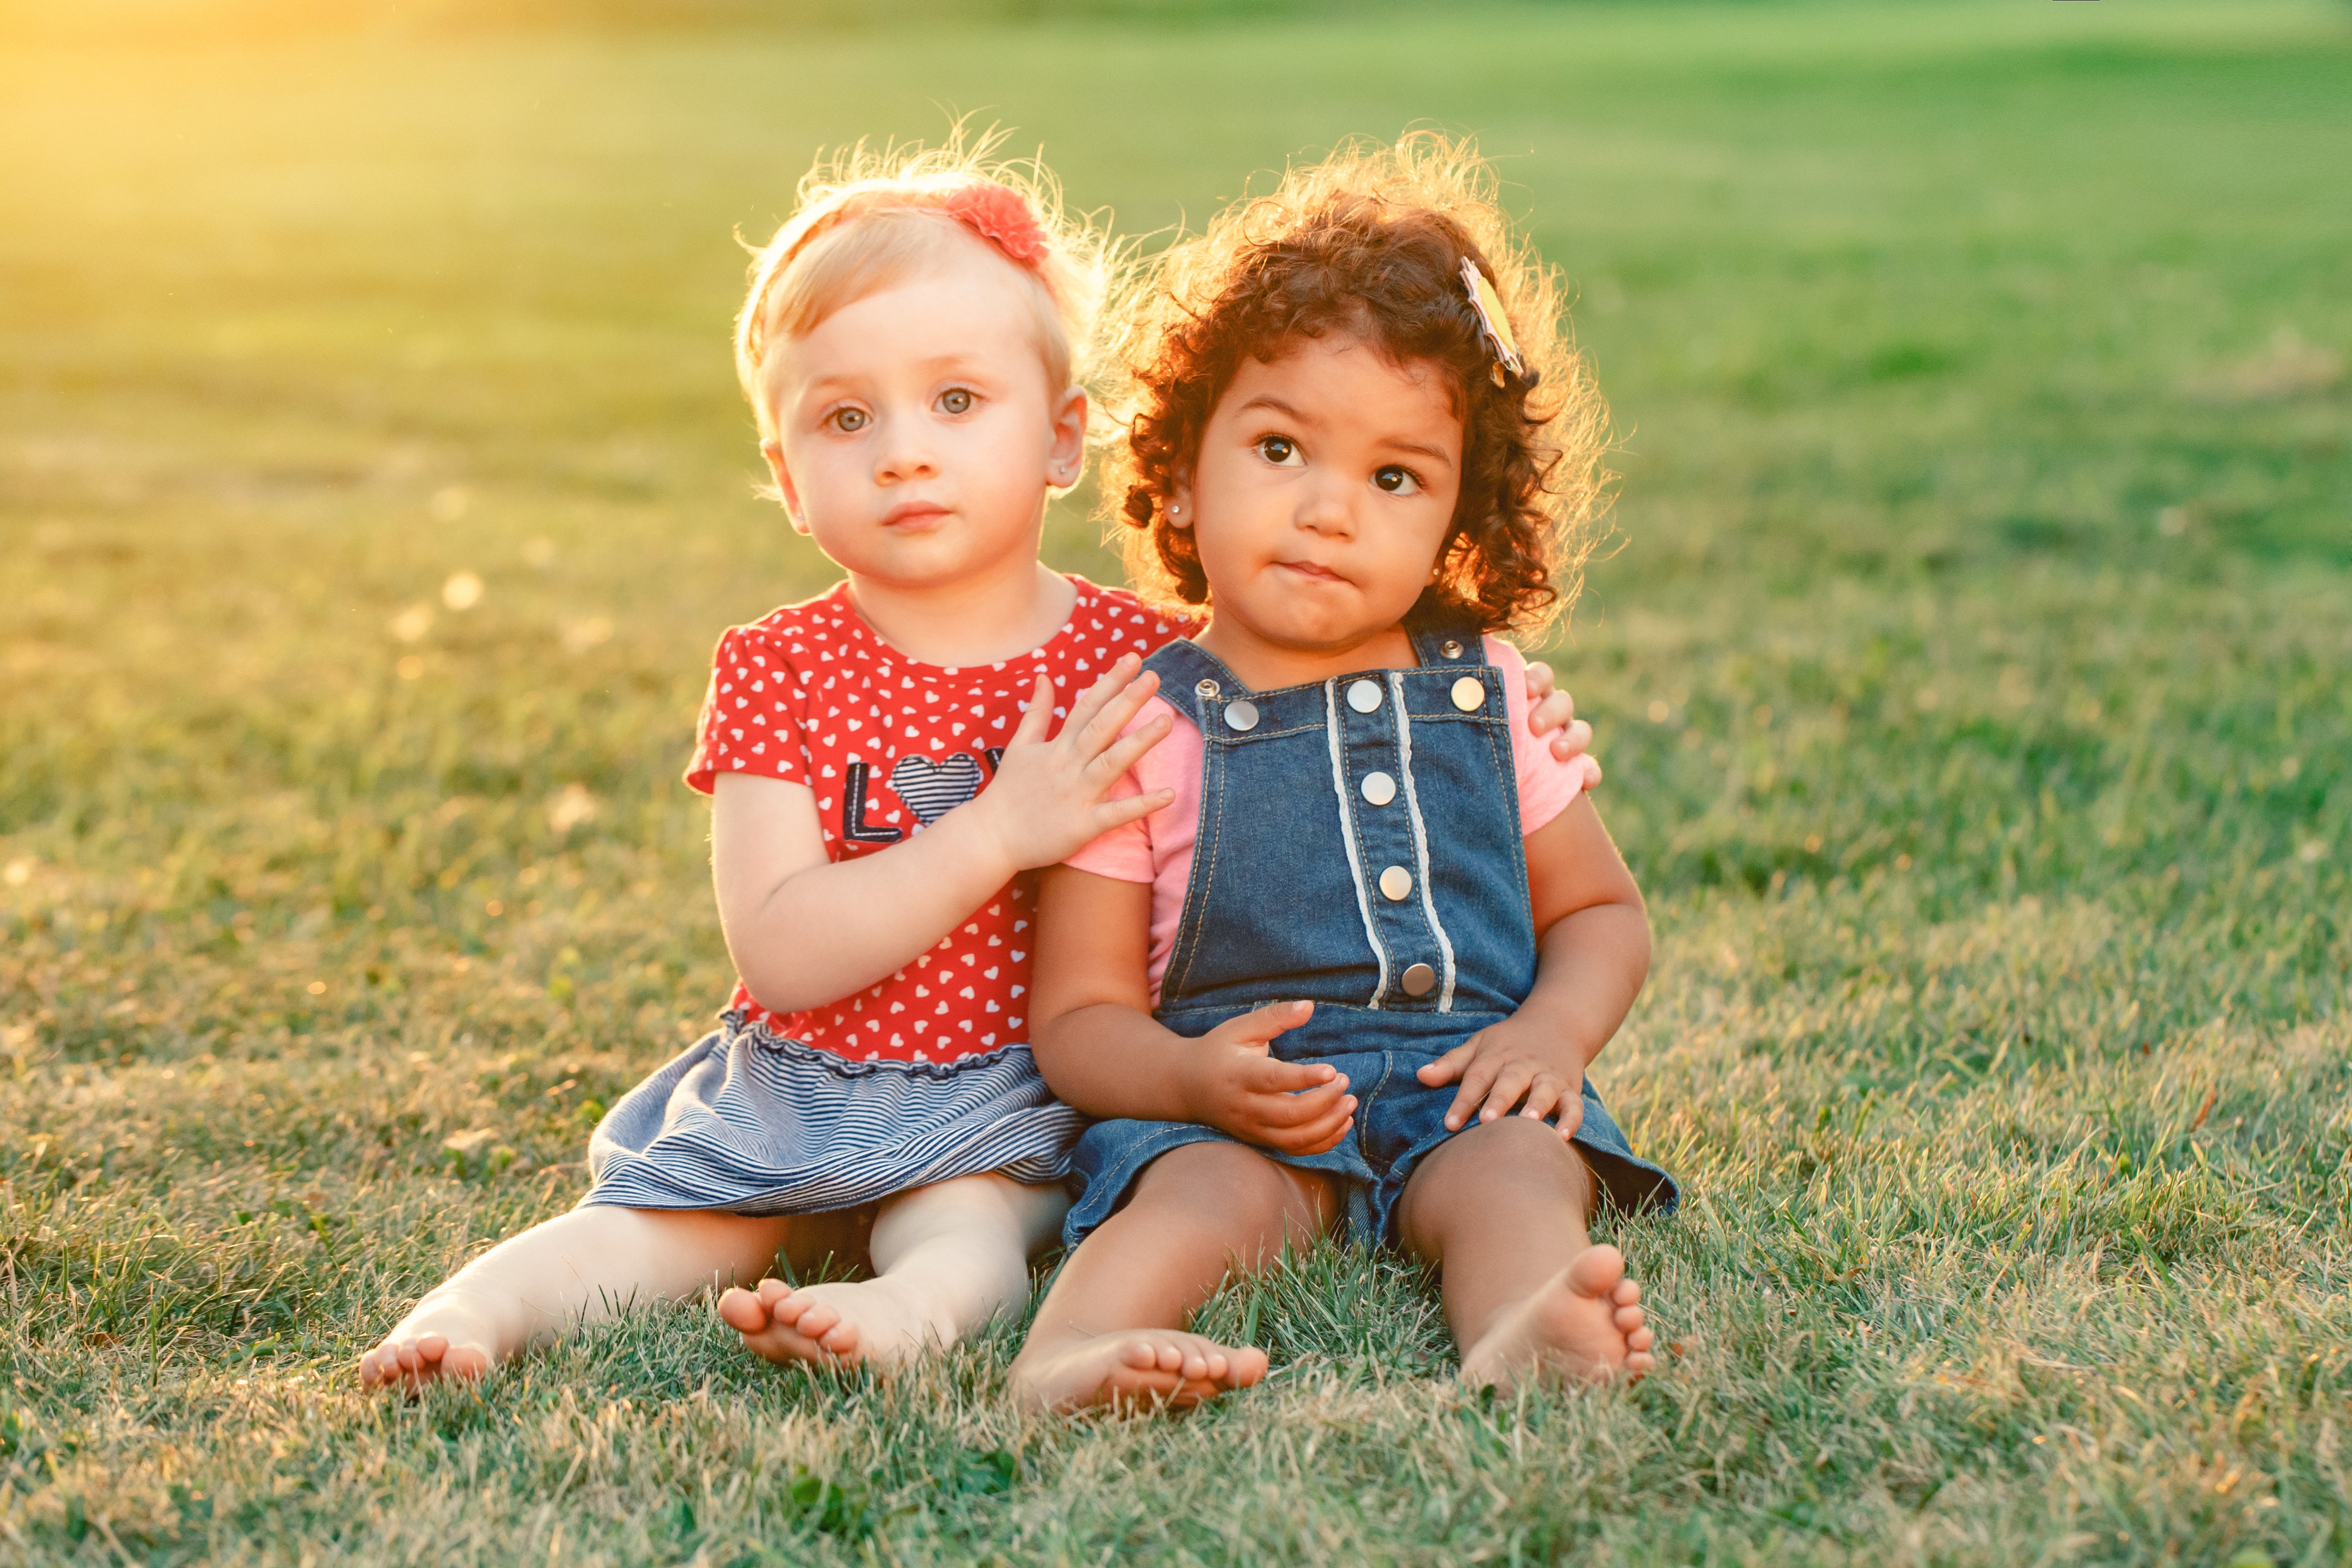 Two toddler girls sitting in the grass and embracing each other.